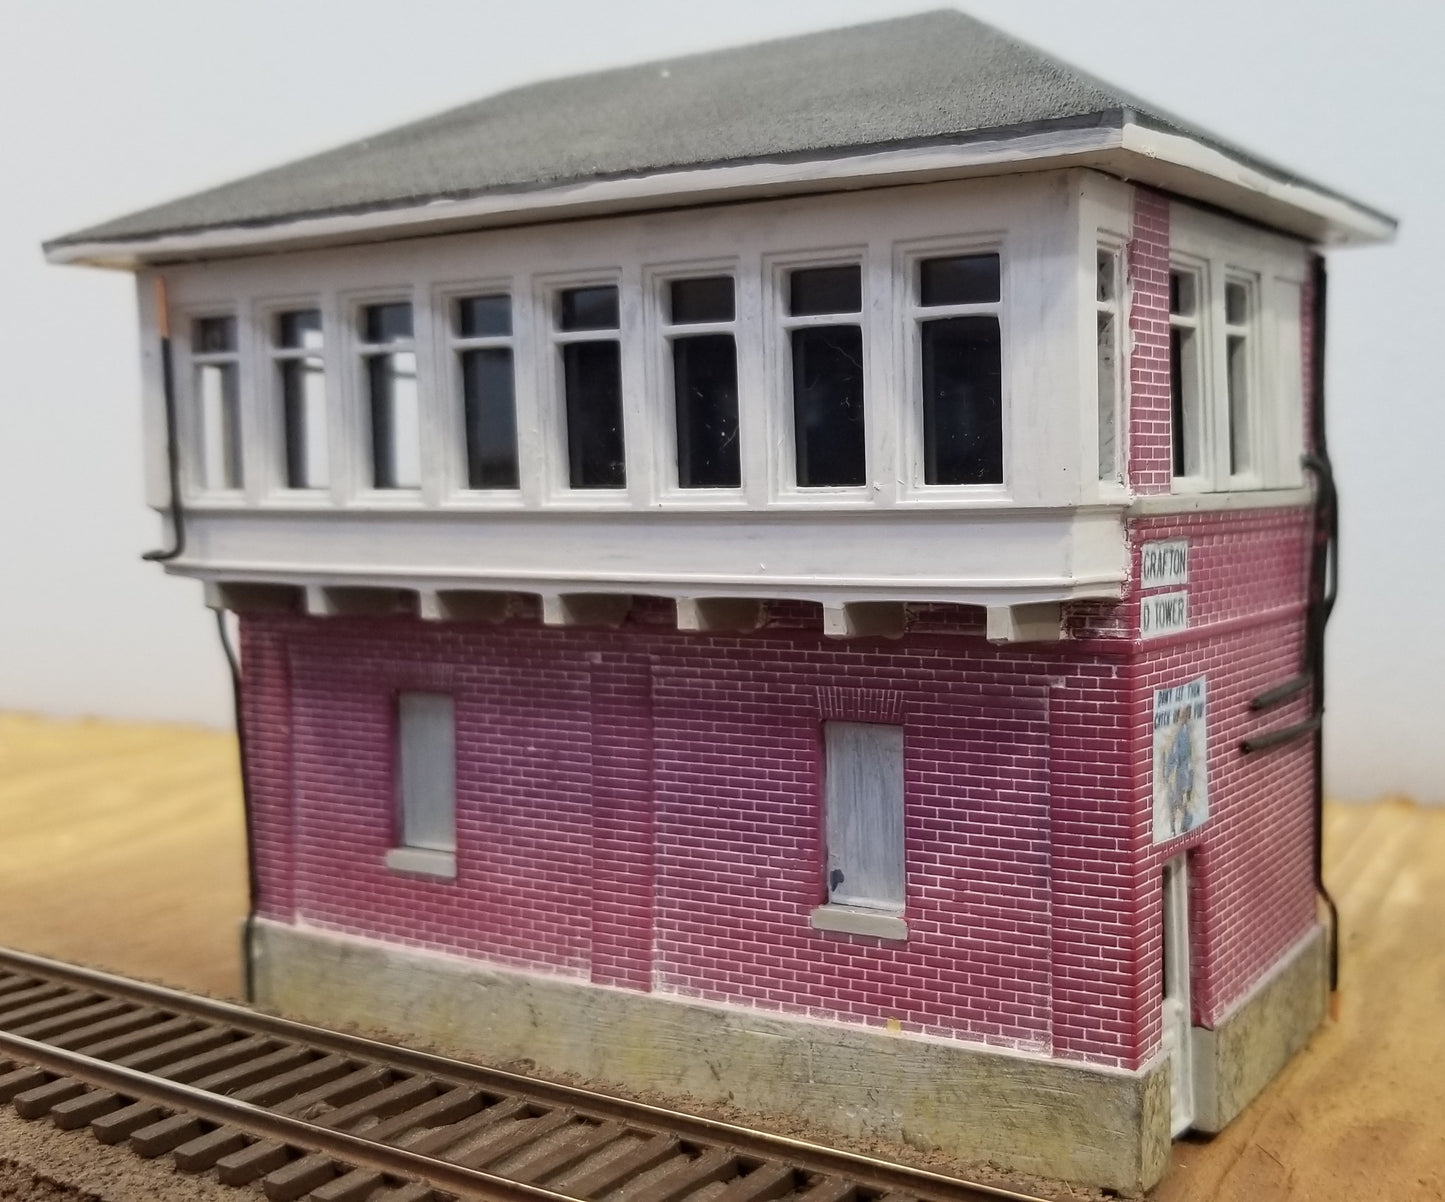 Tower D  Grafton, WV - HO scale